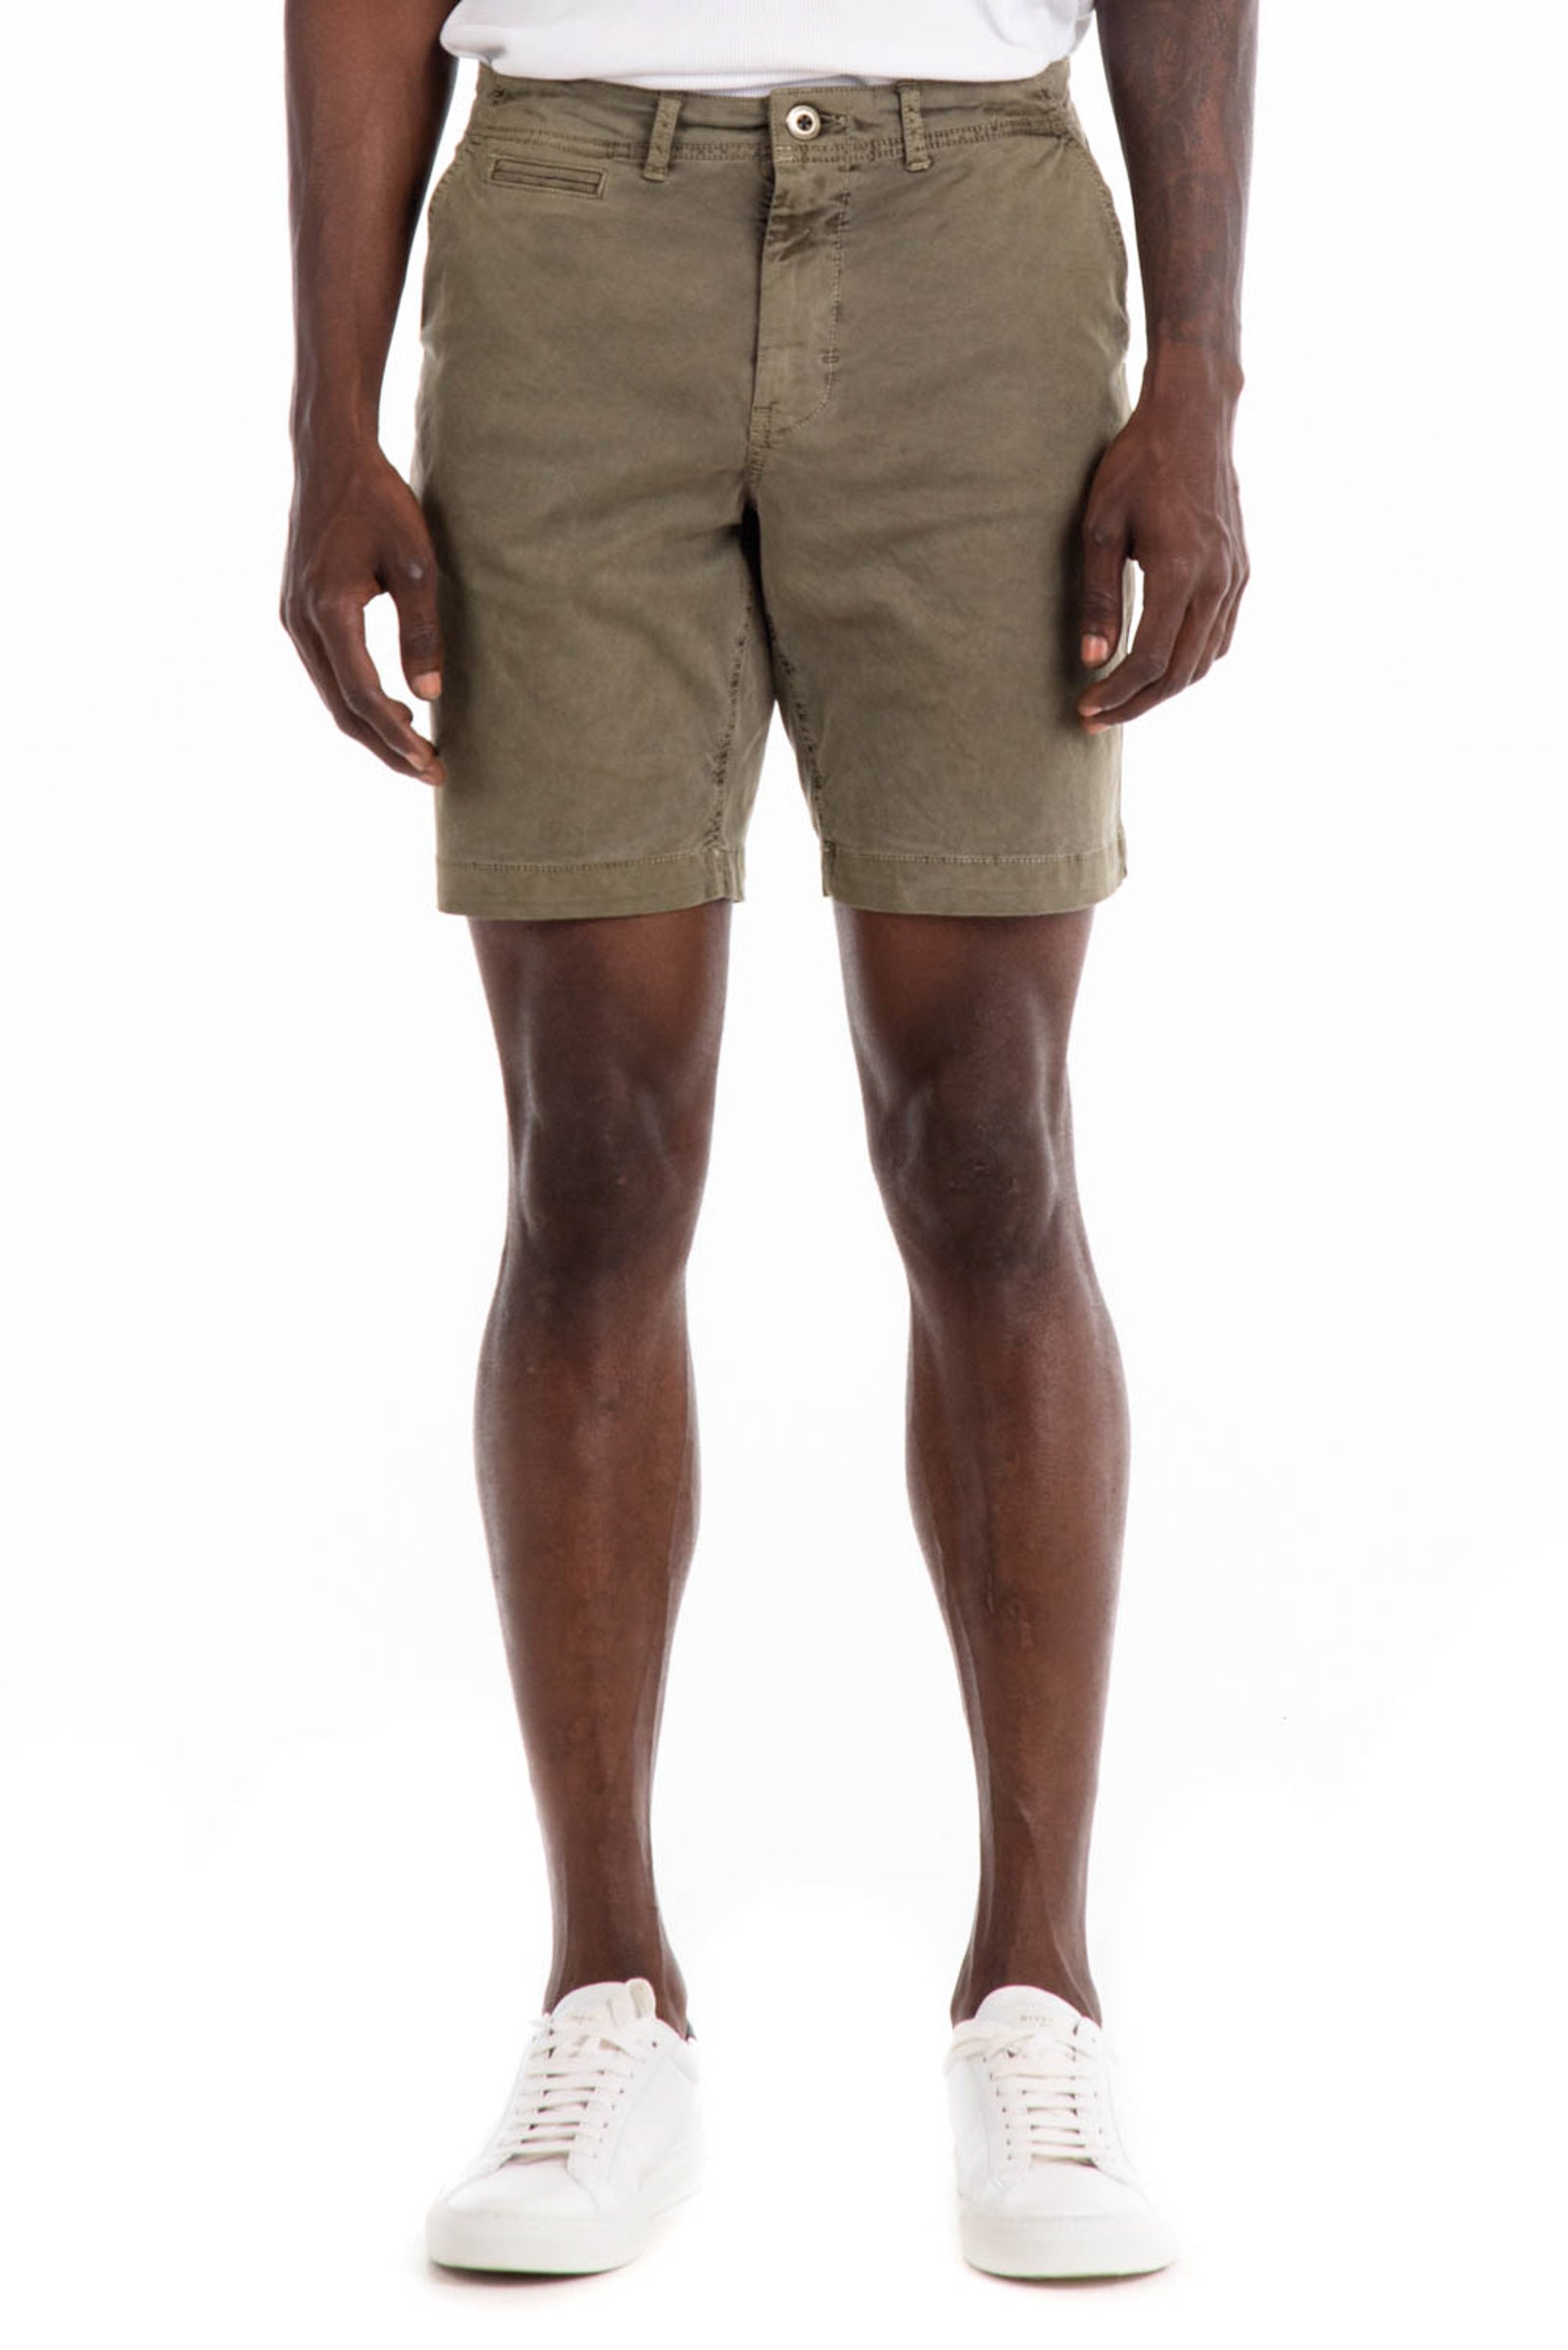 Original Paperbacks Walden Chino Short in Olive on Model Cropped Front View